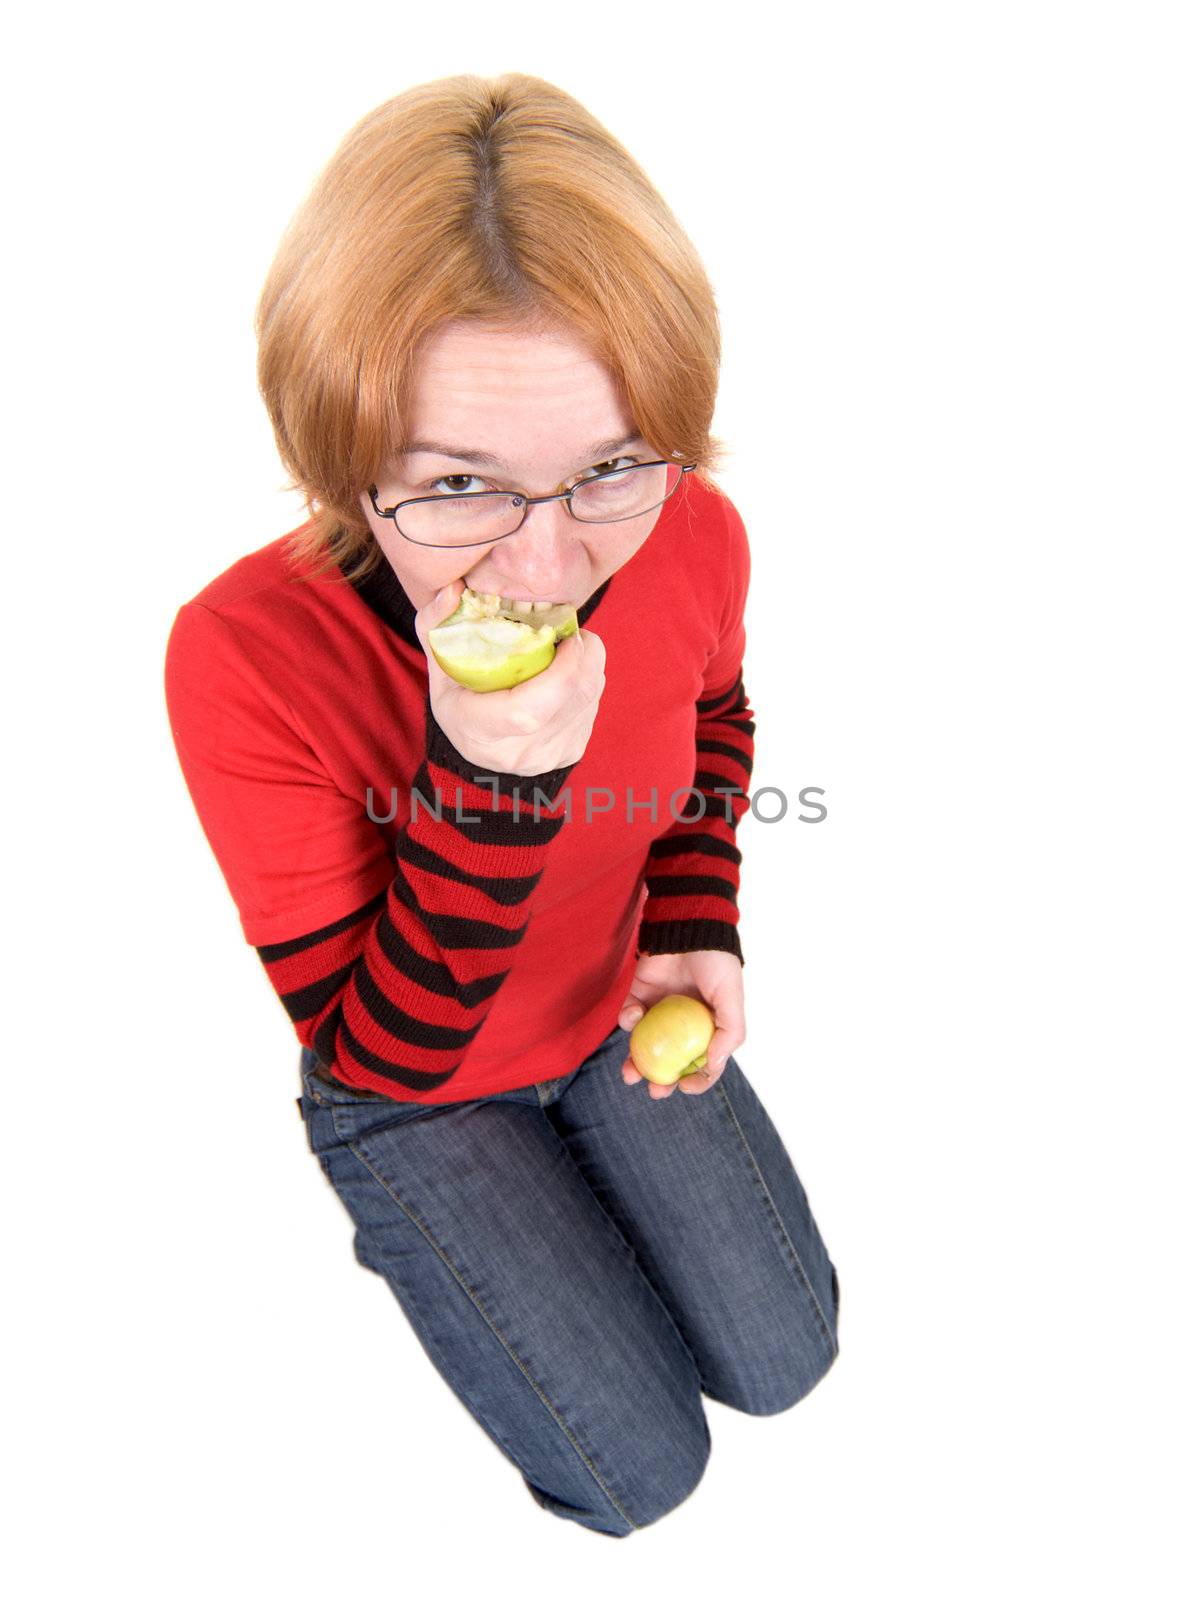 The girl in a red sweater eats an two apples